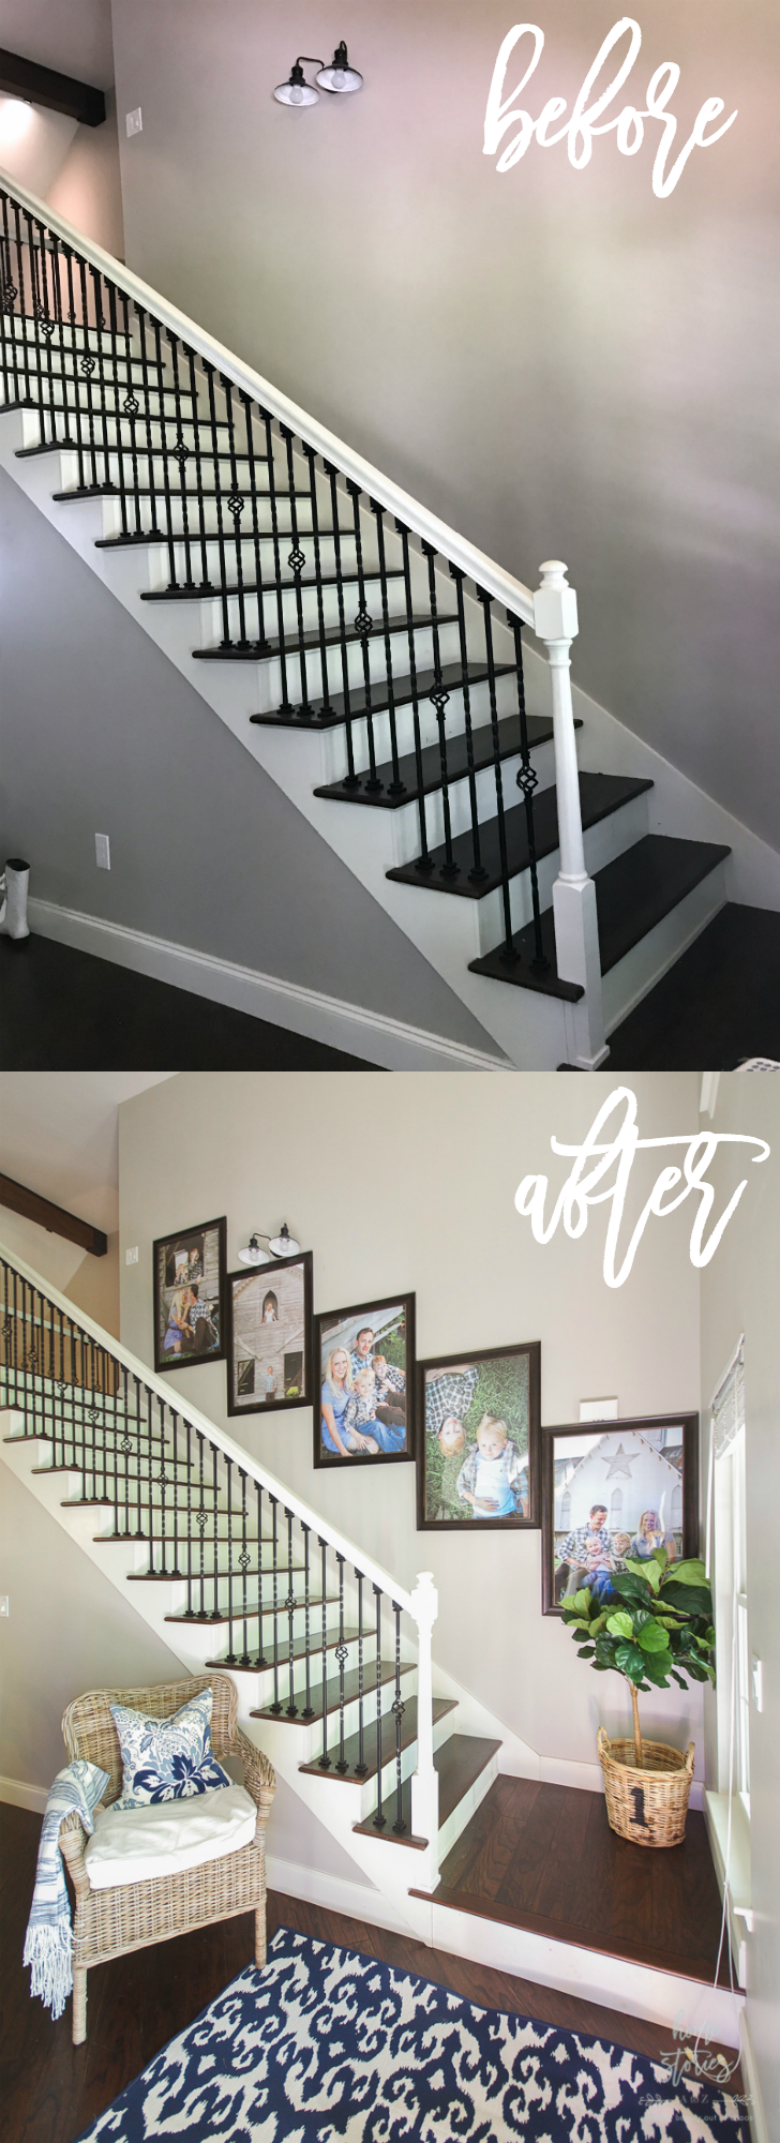 How to Create a Stairway Picture Wall